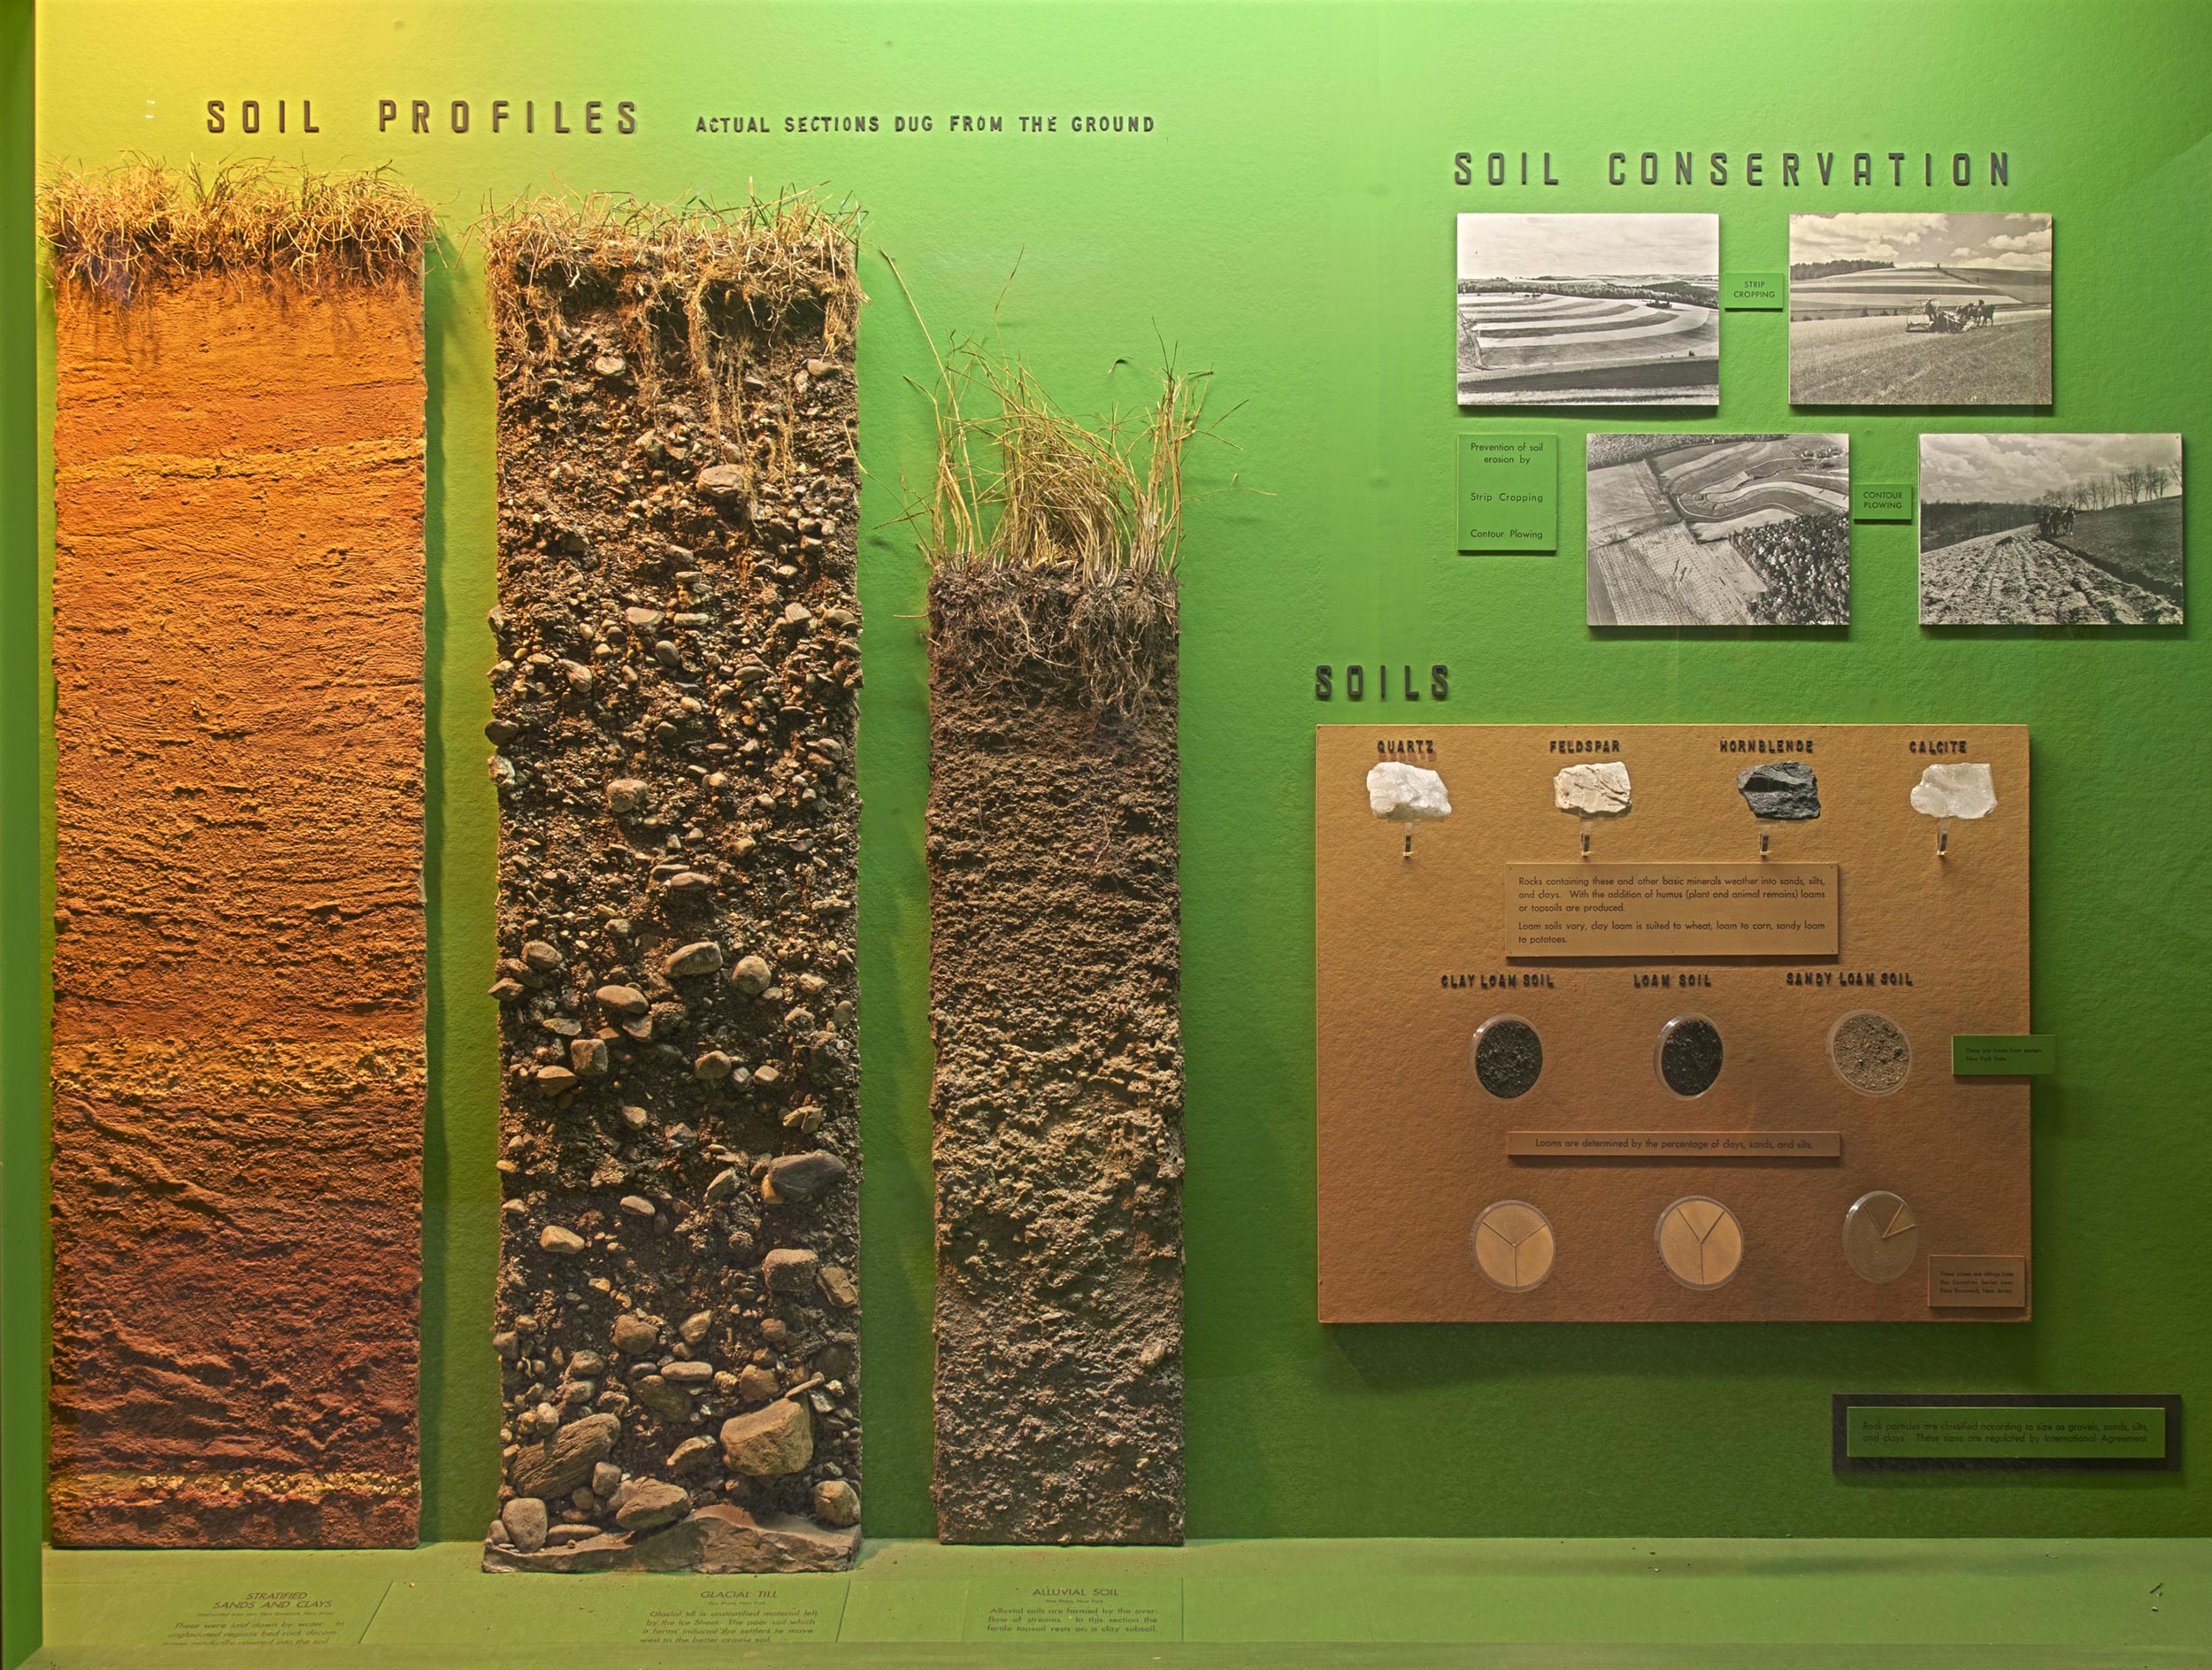 Exhibition case showing several soil profiles (actual sections dug from the soil), pictures about soil conservation and samples of soil.